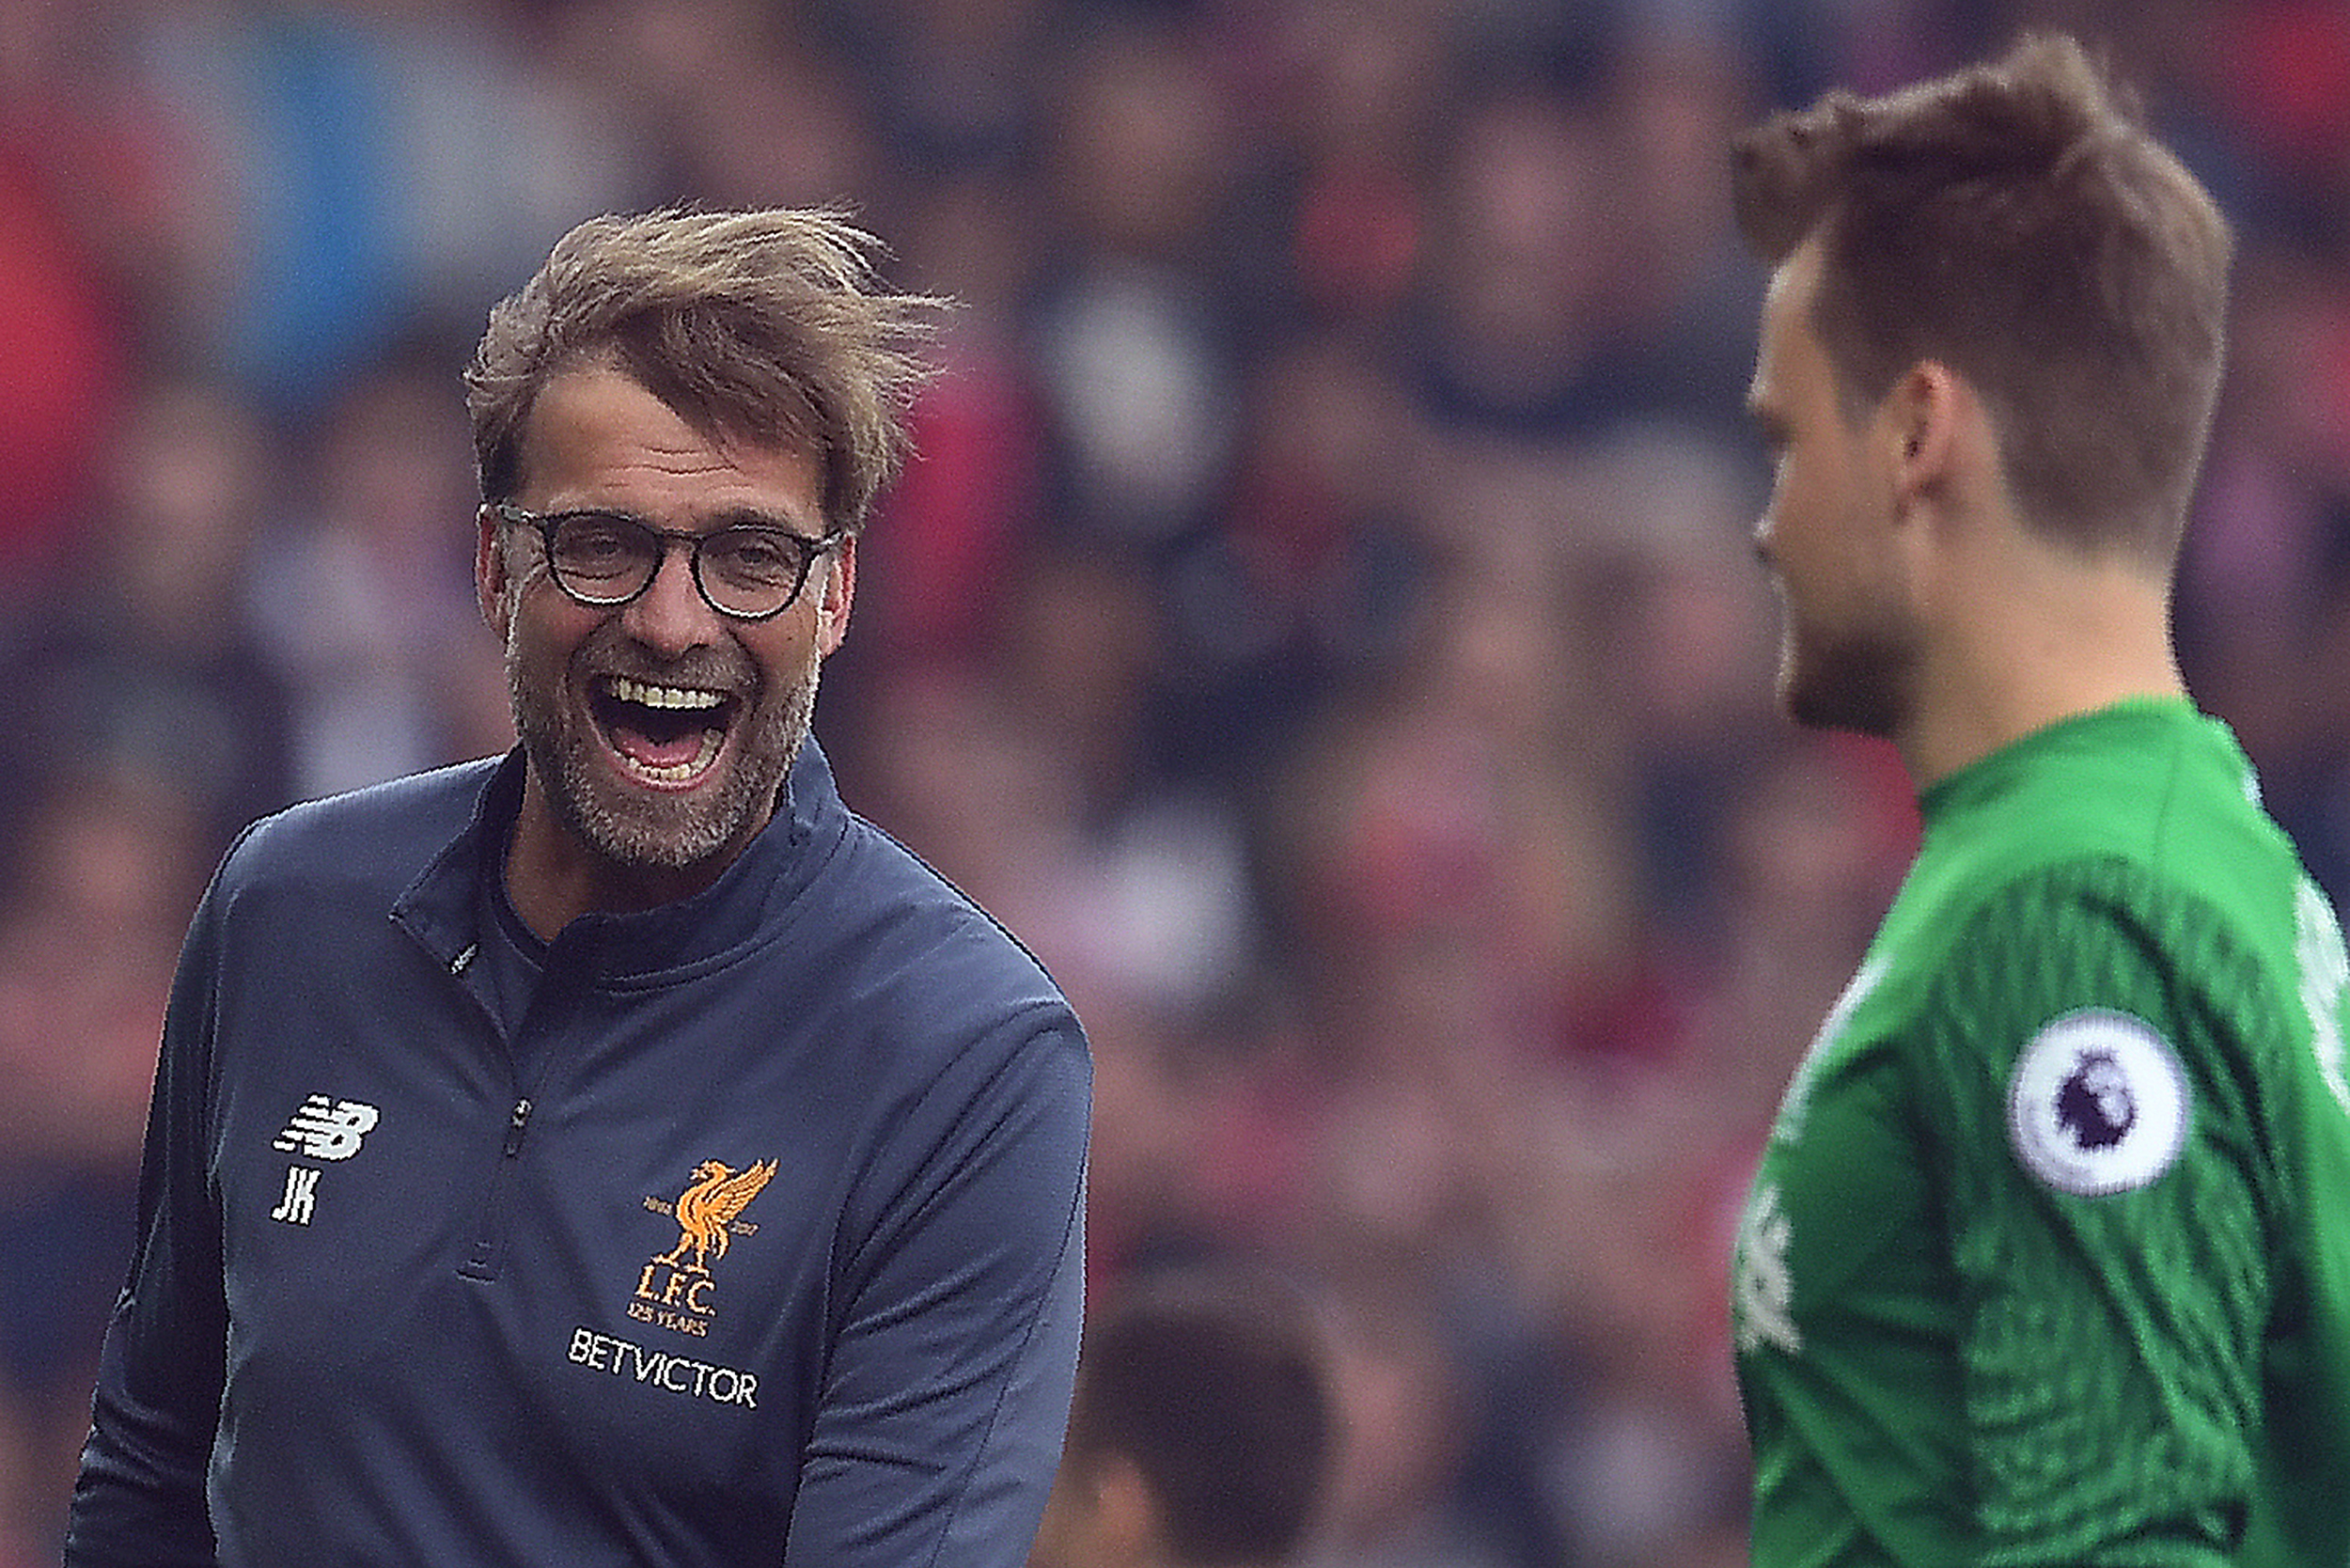 Liverpool's German manager Jurgen Klopp (L) reacts with Liverpool's Belgian goalkeeper Simon Mignolet during the English Premier League football match between Liverpool and Middlesbrough at Anfield in Liverpool, north west England on May 21, 2017.
Liverpool won the match 3-0. / AFP PHOTO / Paul ELLIS / RESTRICTED TO EDITORIAL USE. No use with unauthorized audio, video, data, fixture lists, club/league logos or 'live' services. Online in-match use limited to 75 images, no video emulation. No use in betting, games or single club/league/player publications.  /         (Photo credit should read PAUL ELLIS/AFP/Getty Images)